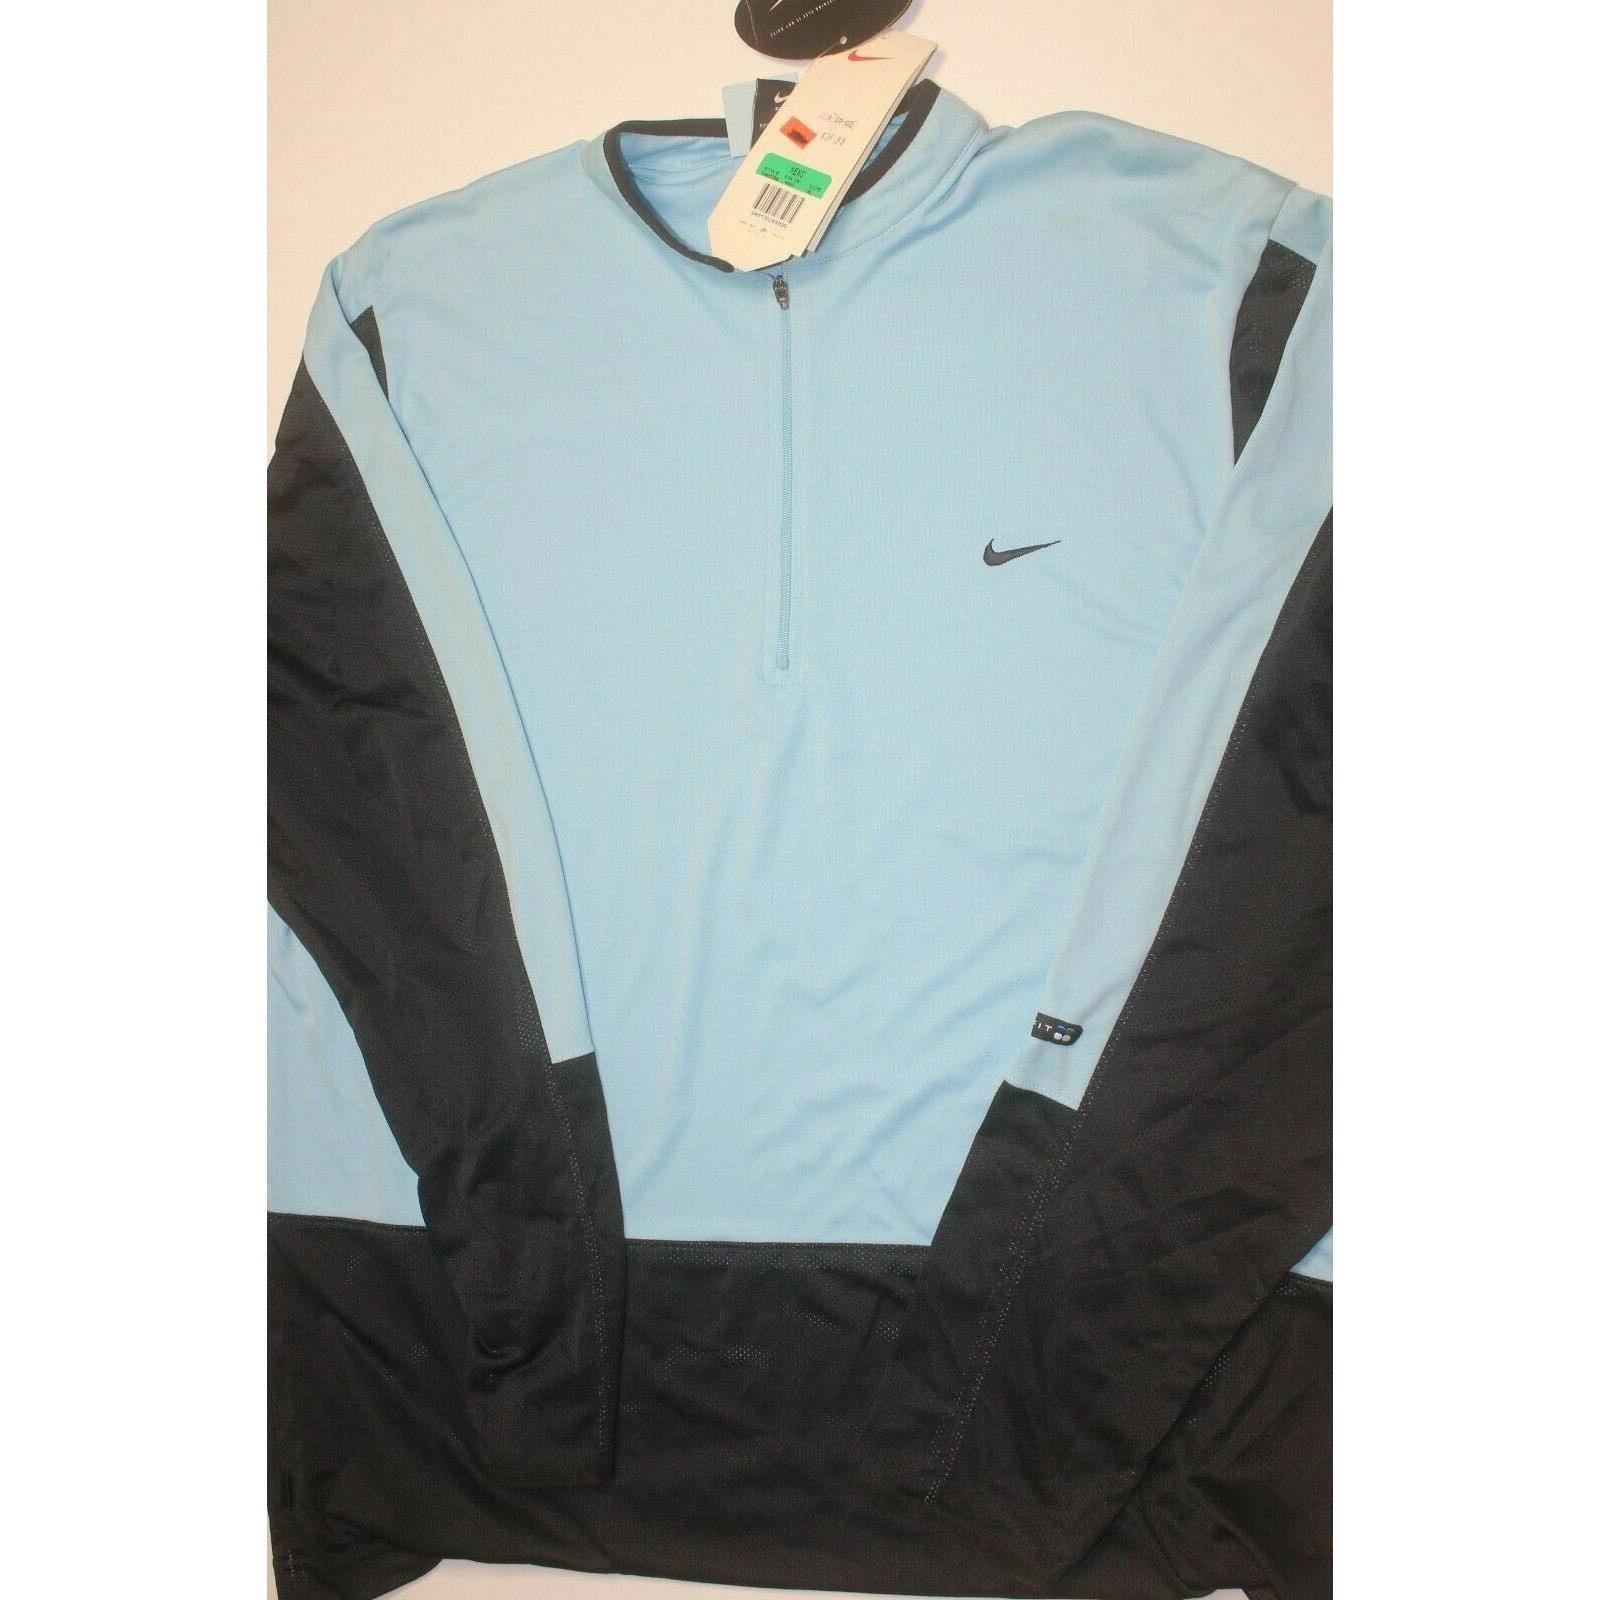 Nike X Andre Agassi Tennis Jersey Polo Shirt 1990`s Vintage Retro XL